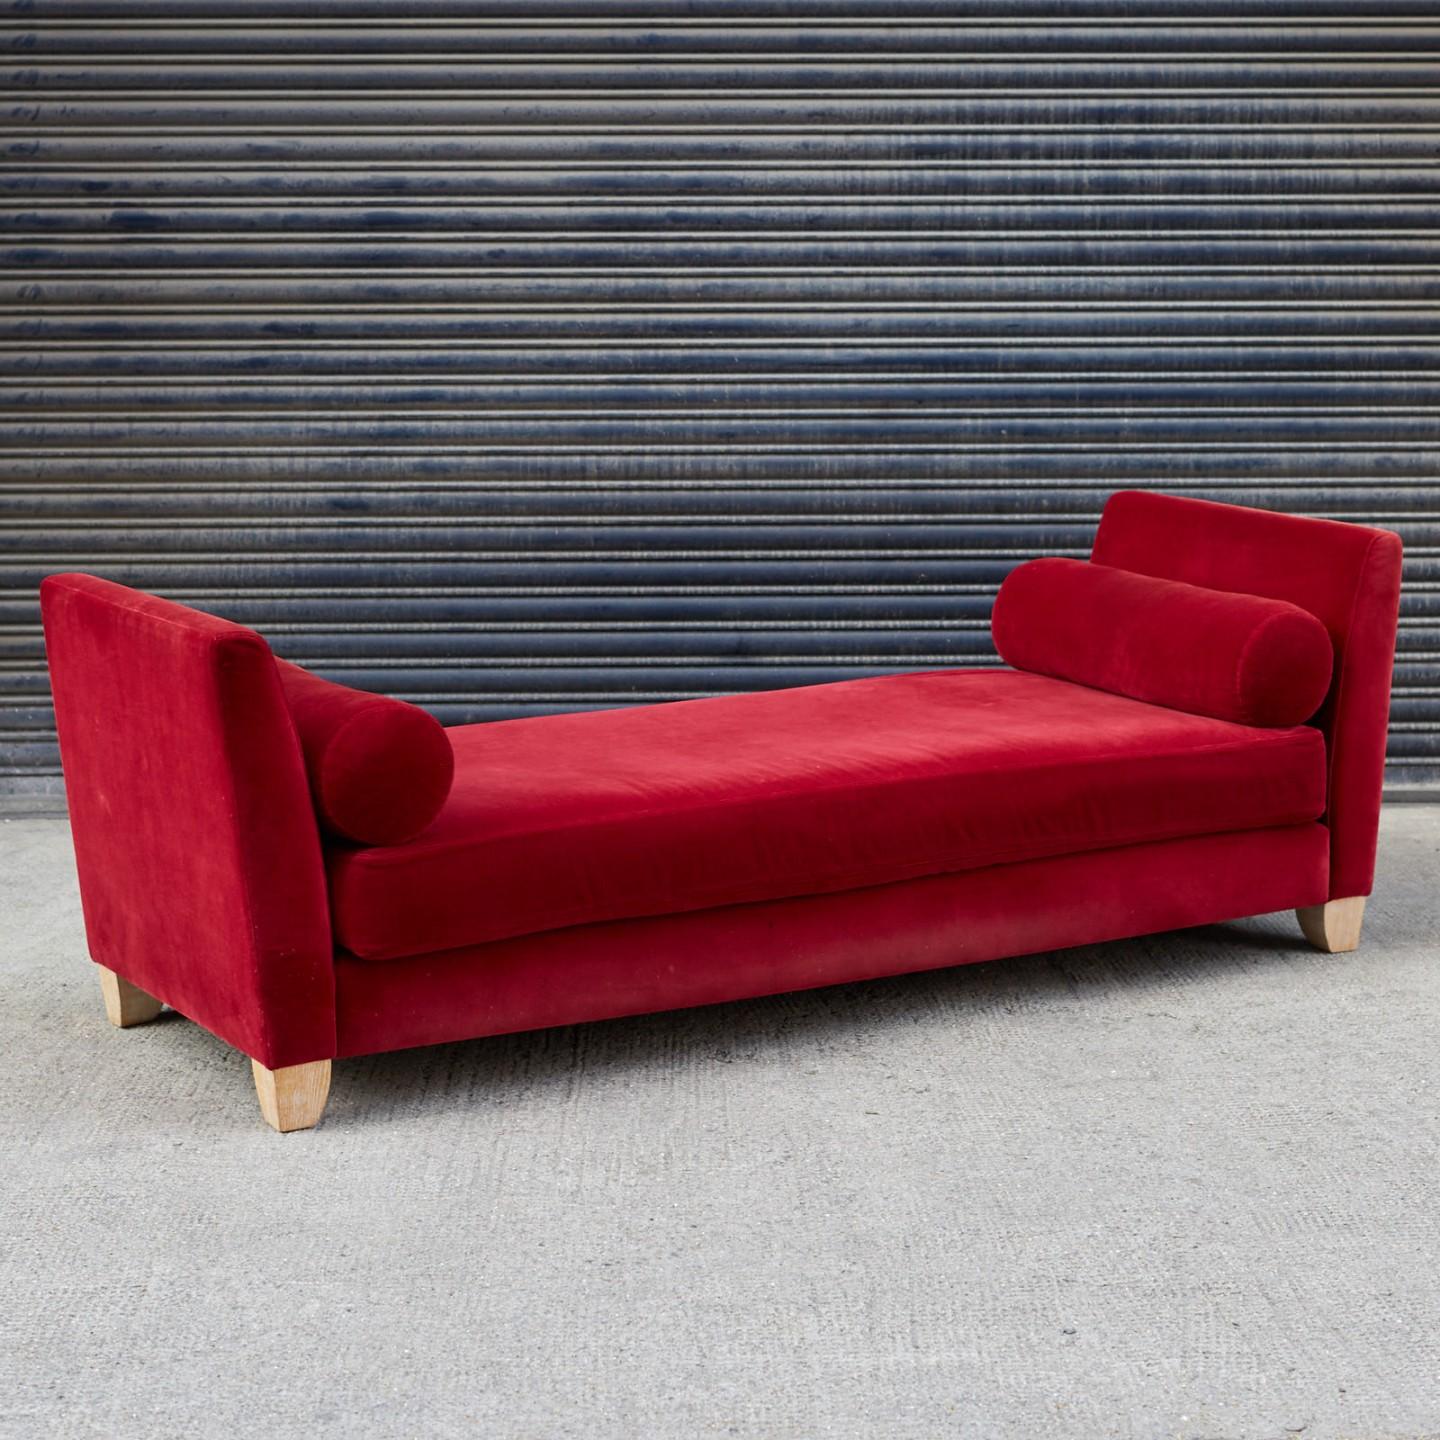 A red velvet upholstered daybed sofa with limed oak feet.